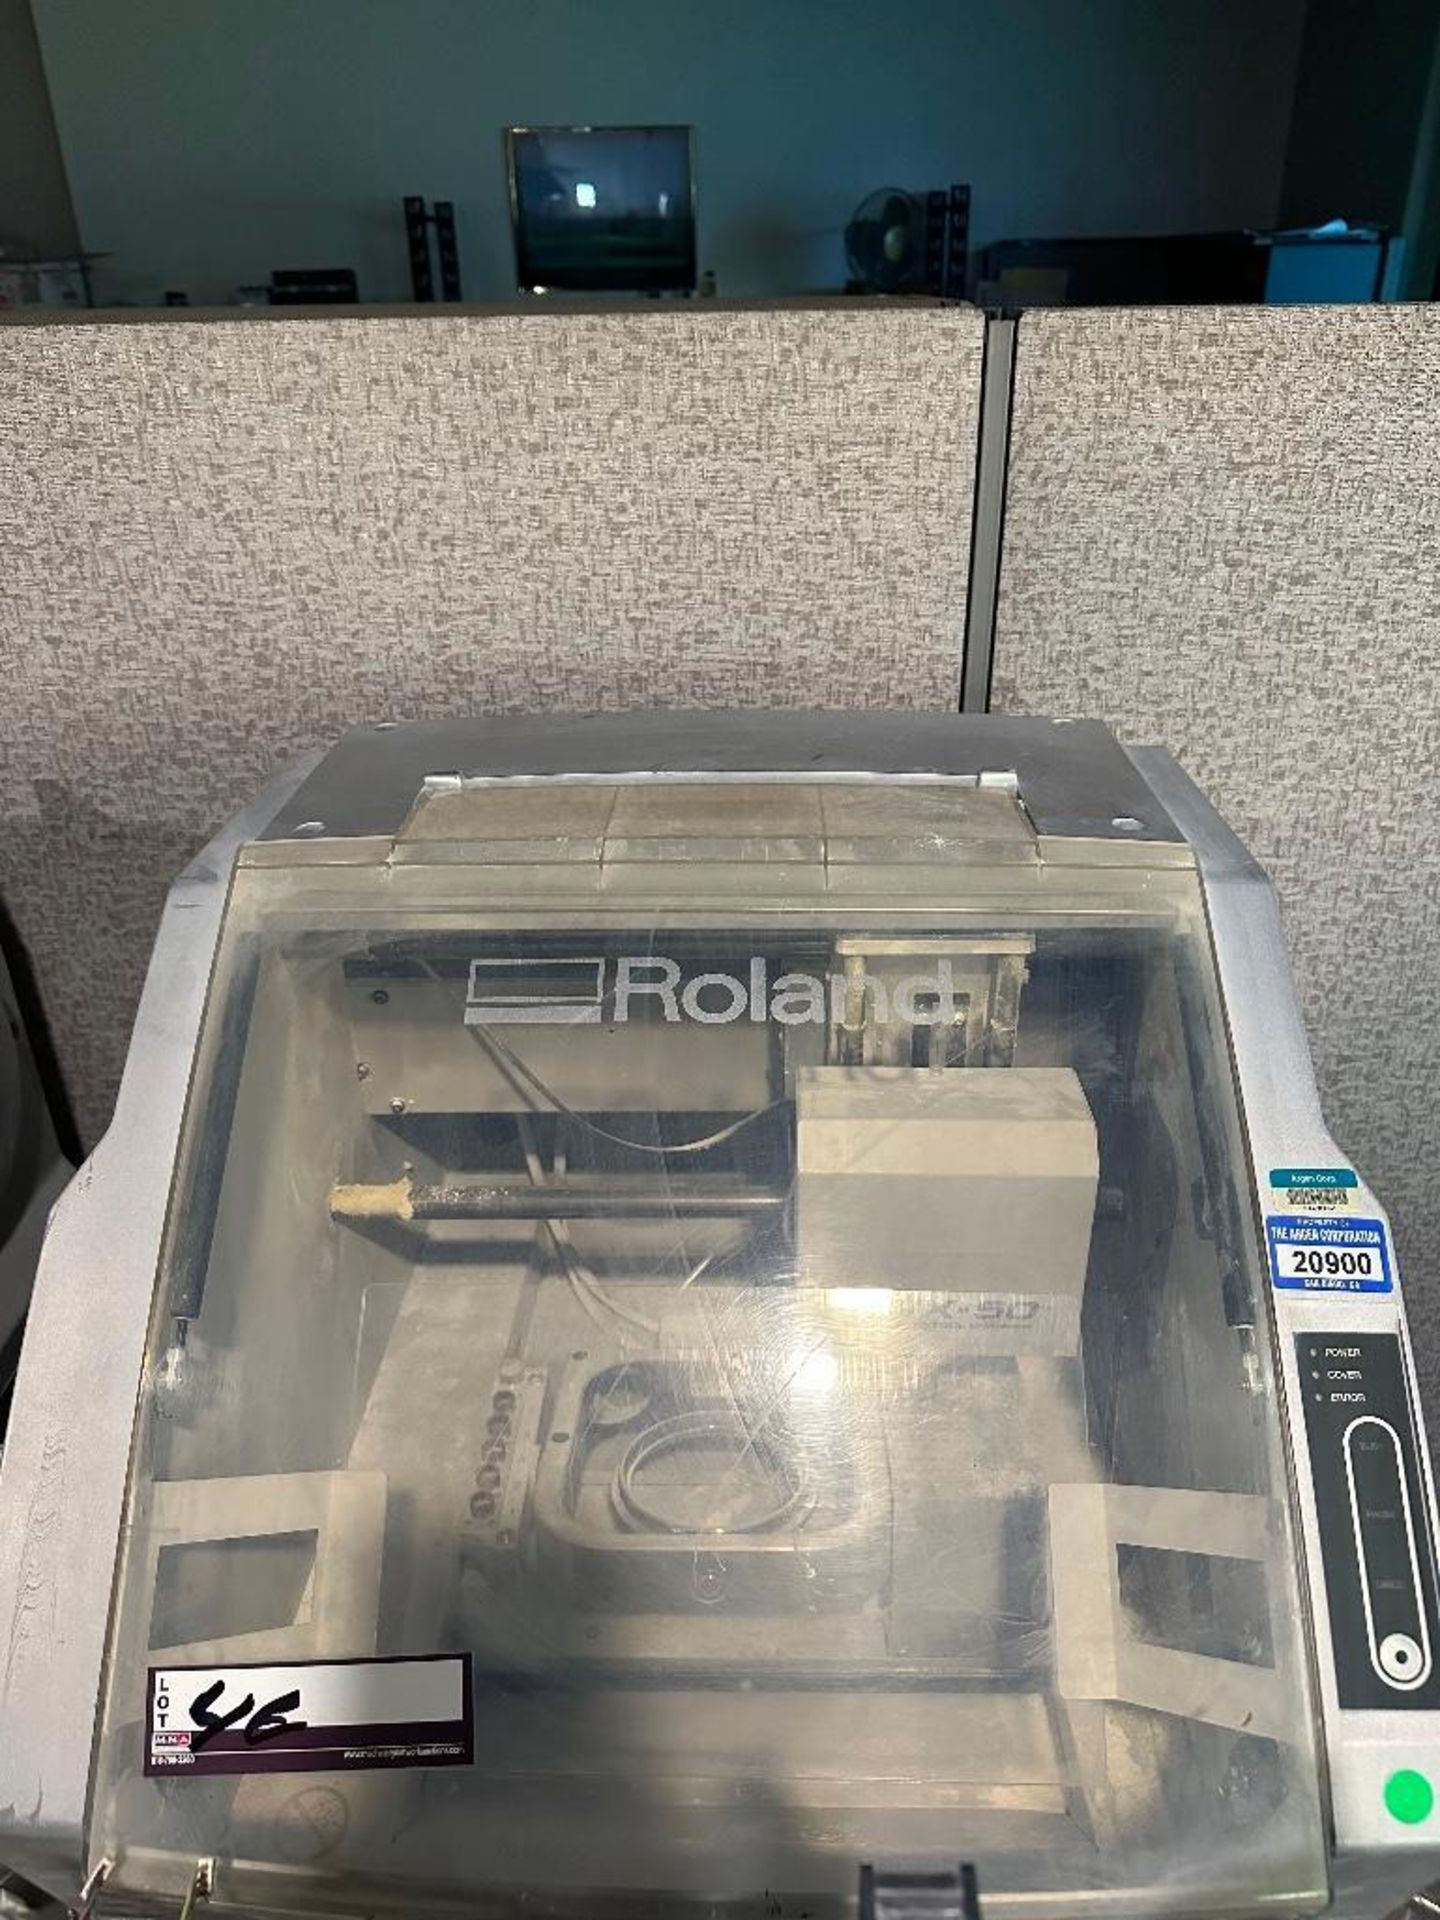 Roland DWX-50 5-Axis Dental Mill, Auto Tool Changer *MISSING CONTROL COMPONENTS*